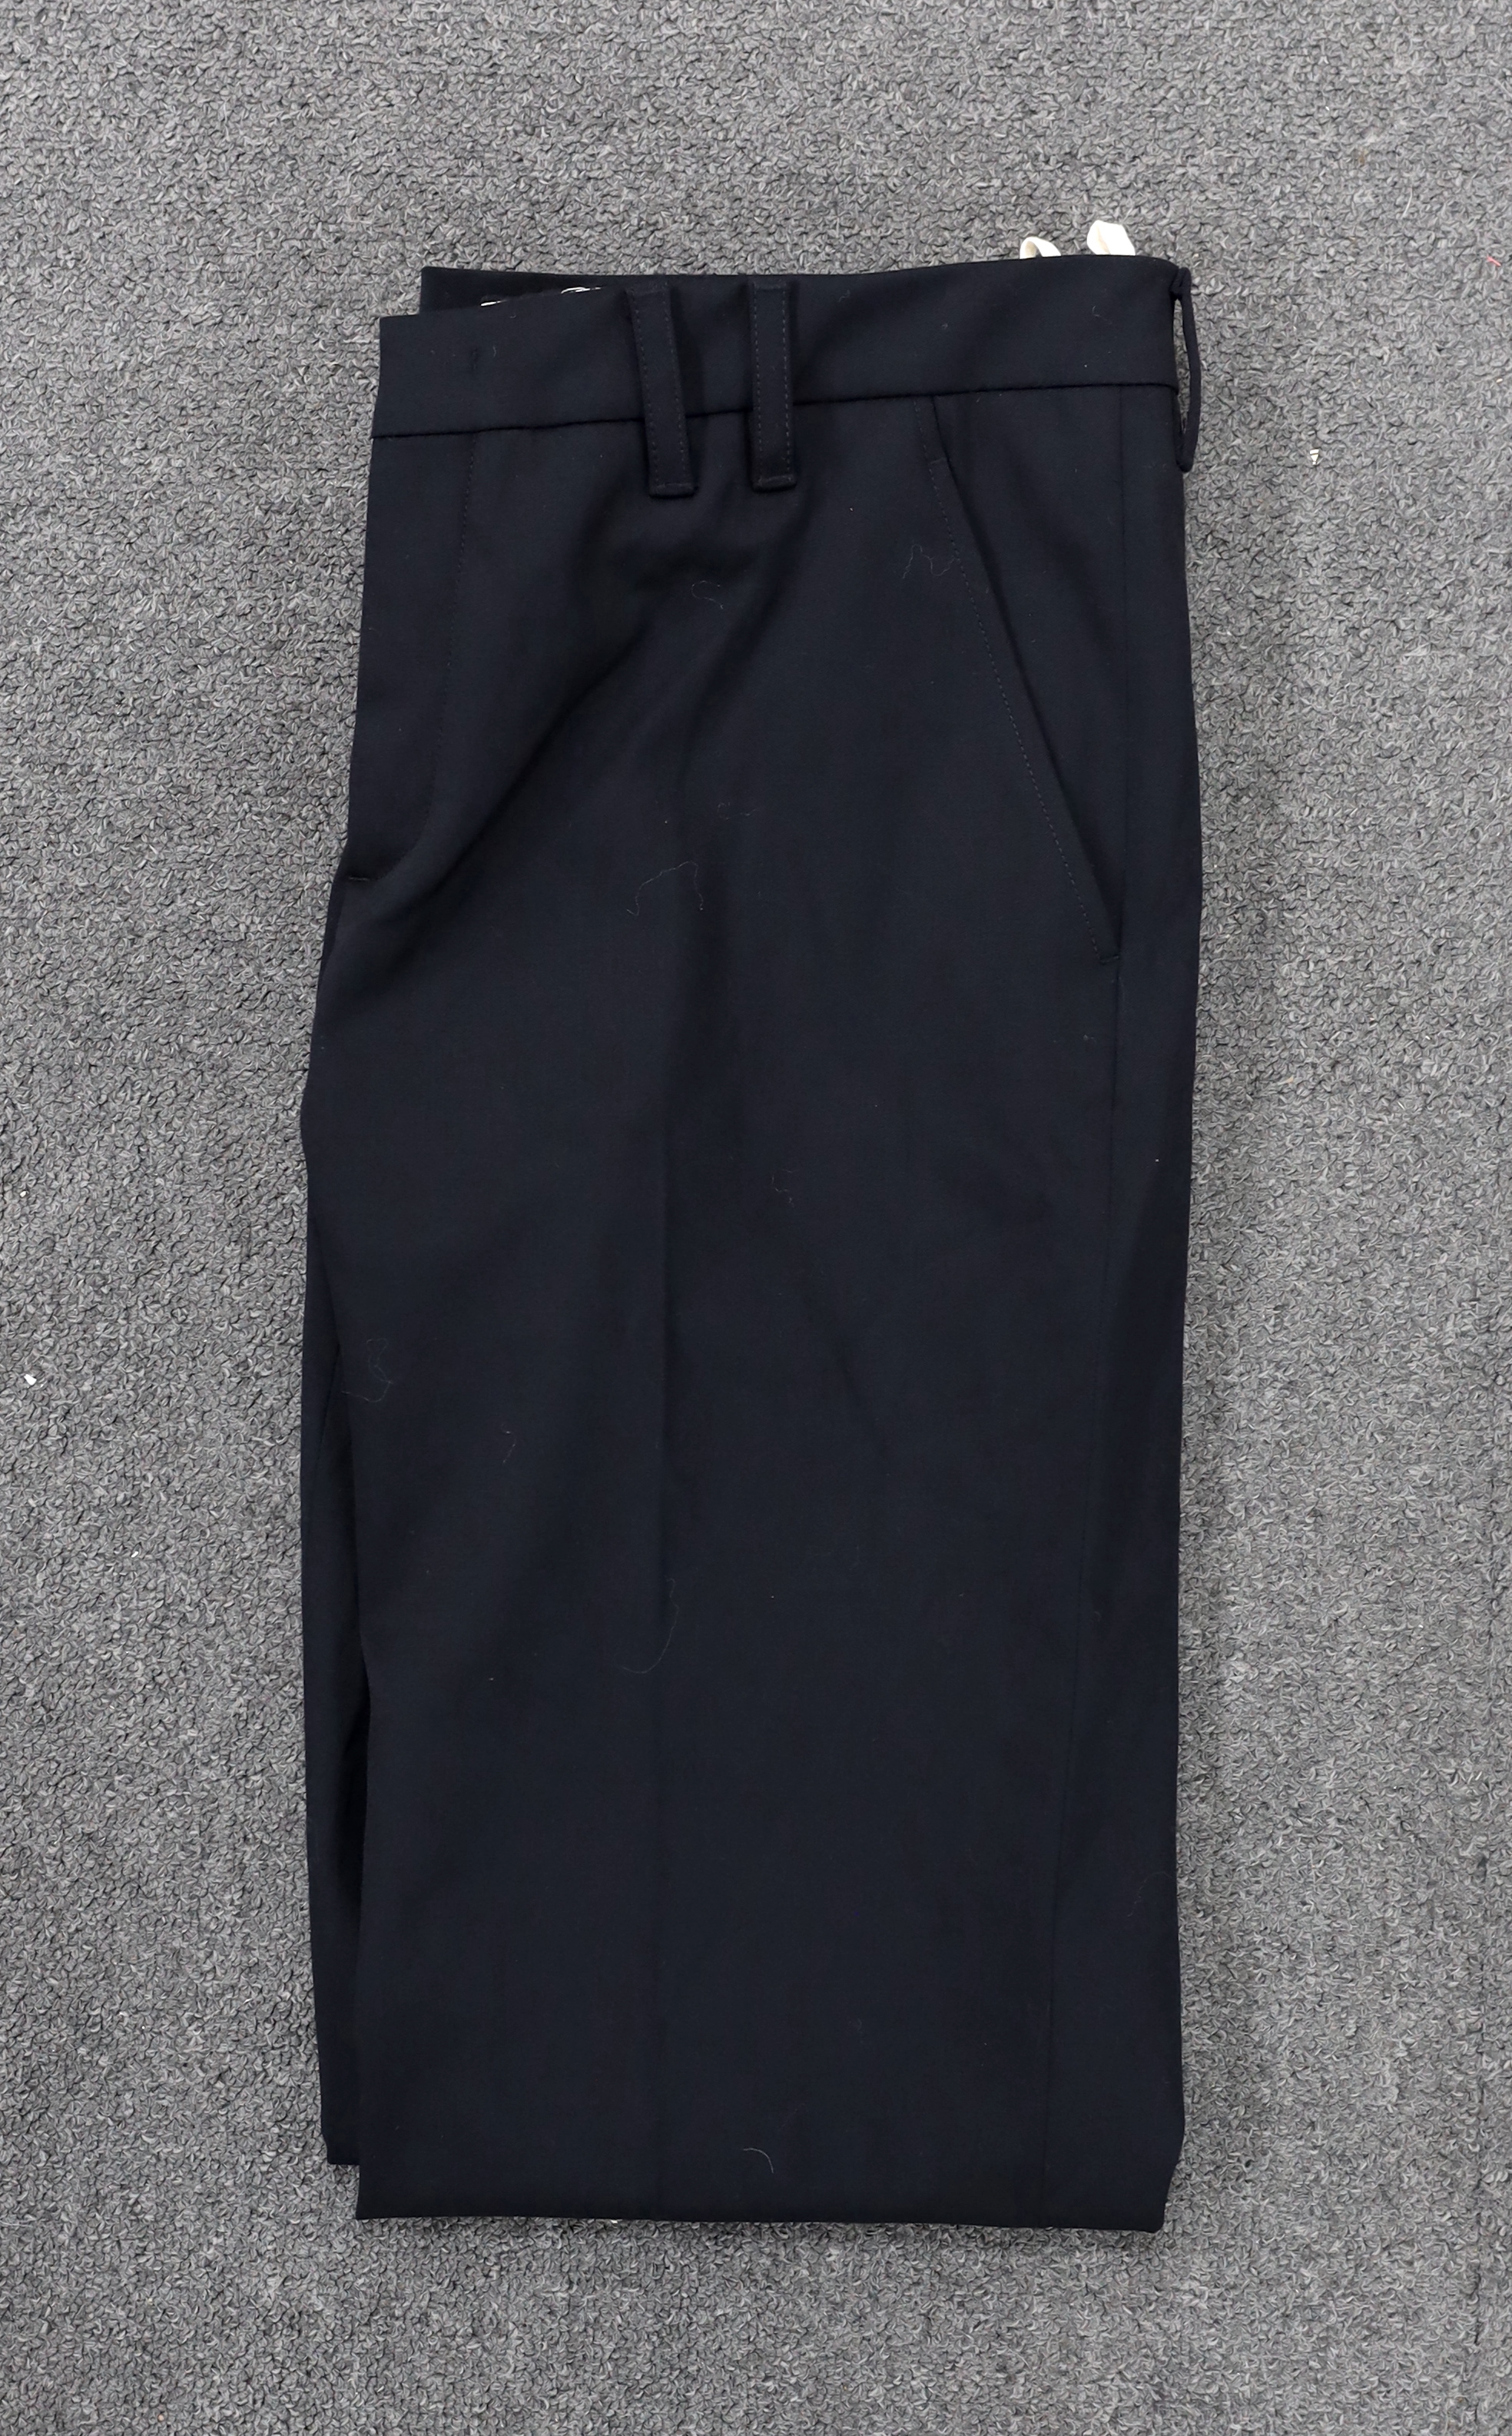 A Prada black A line wool skirt with silver embellishment on the pockets, a blue cotton canvas short swing raincoat and a black pair of wool suit trousers, all size 42